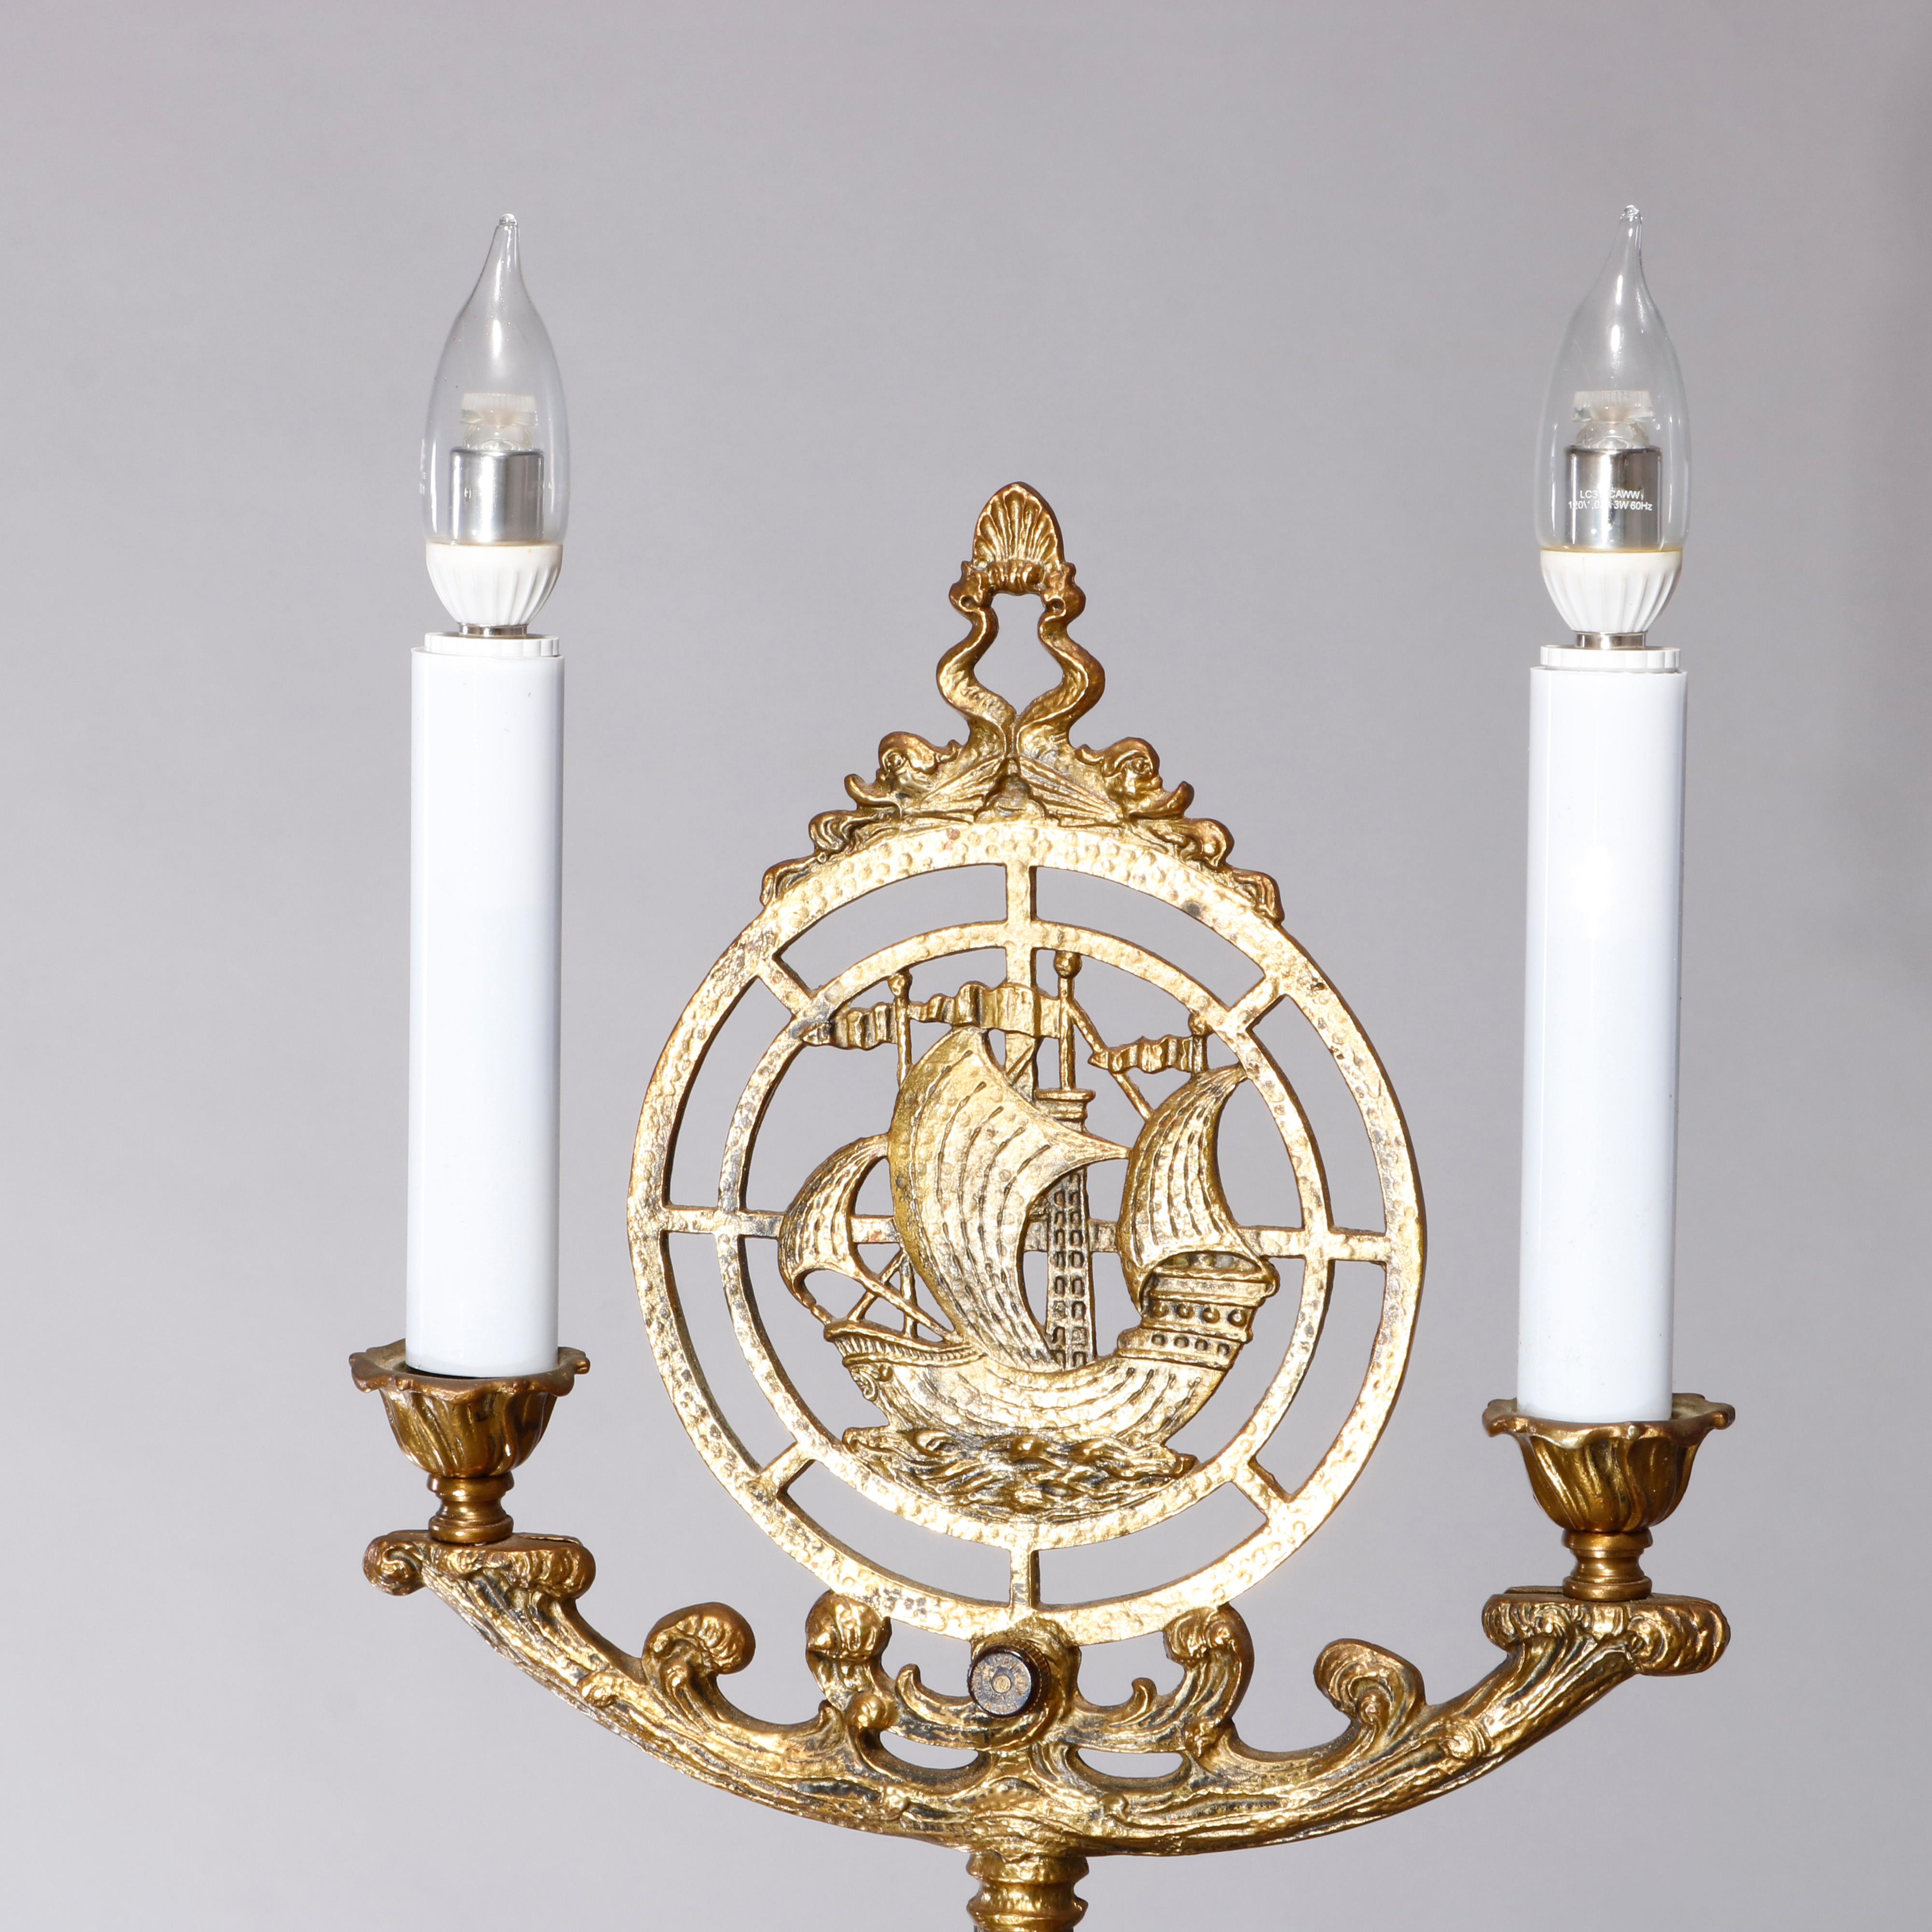 An antique floor lamp in the manner of Rembrandt offers wrought iron and brass construction with Maritime elements including tall mast ships and sea serpents with double candle lights, circa 1920.

Measures: 65.5